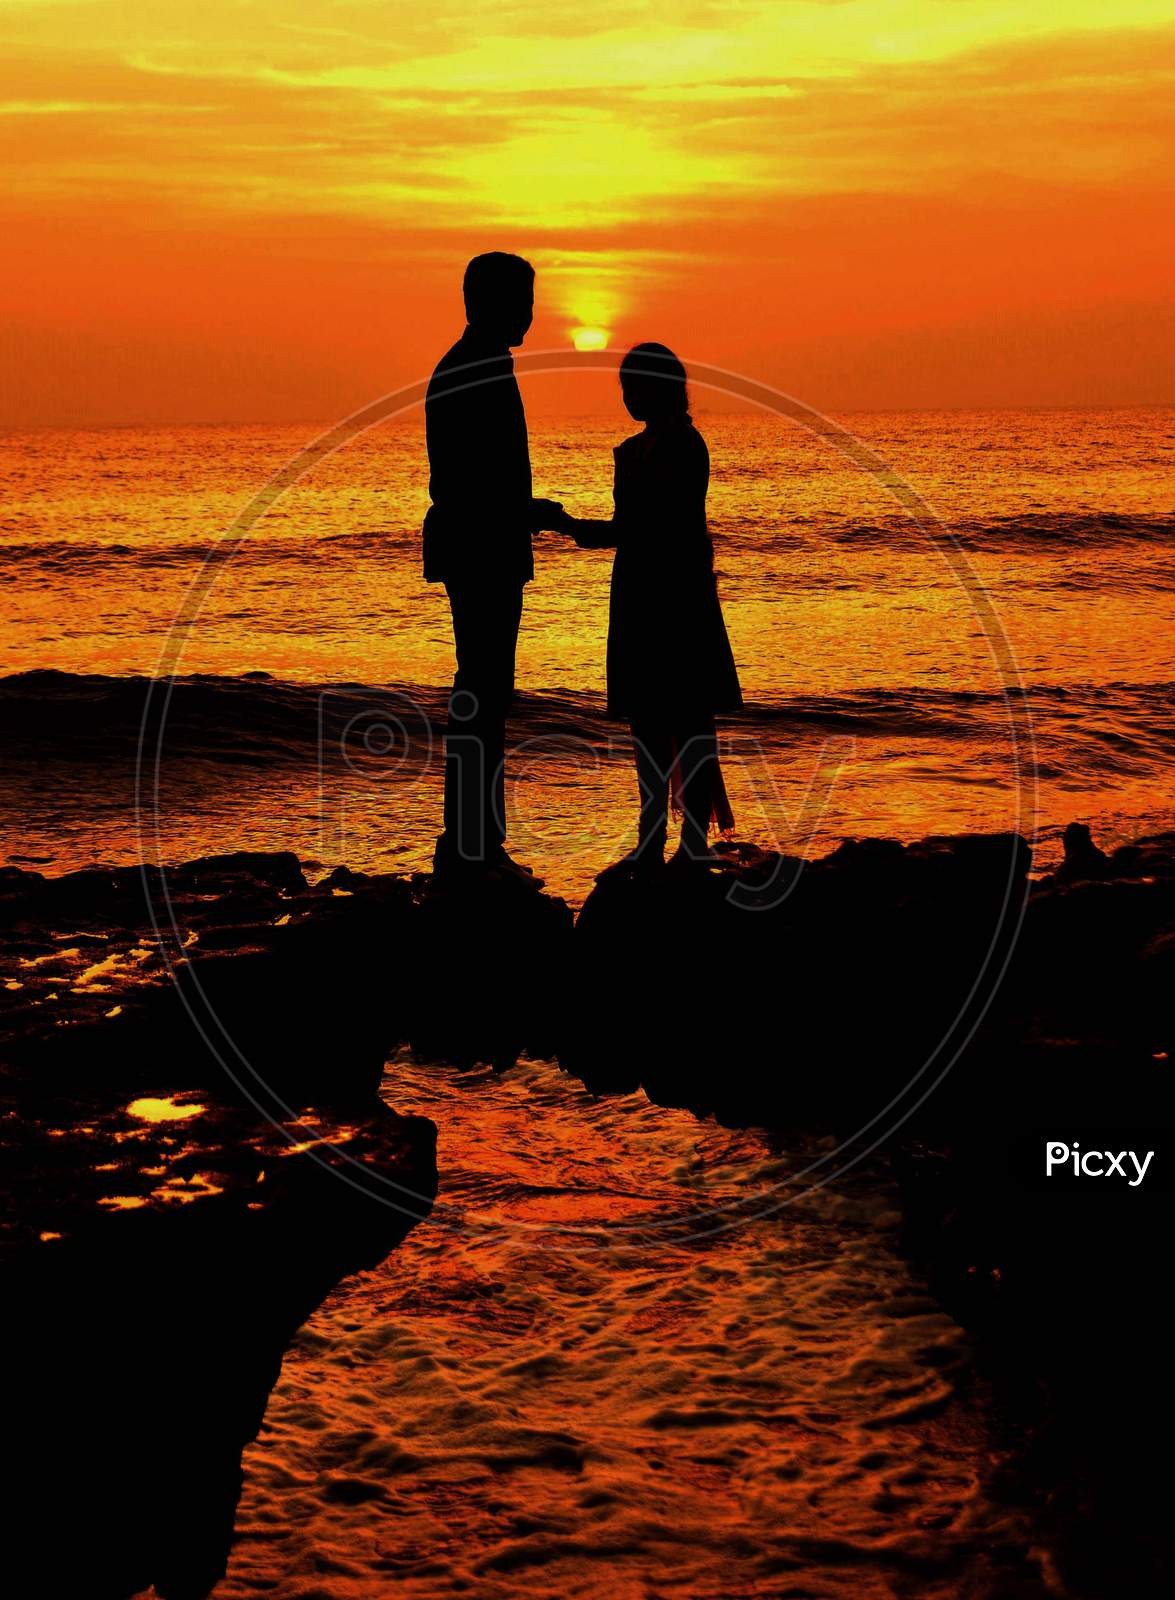 Silhouette of Lover Couple Over a Beach With Sunset Sky in Background